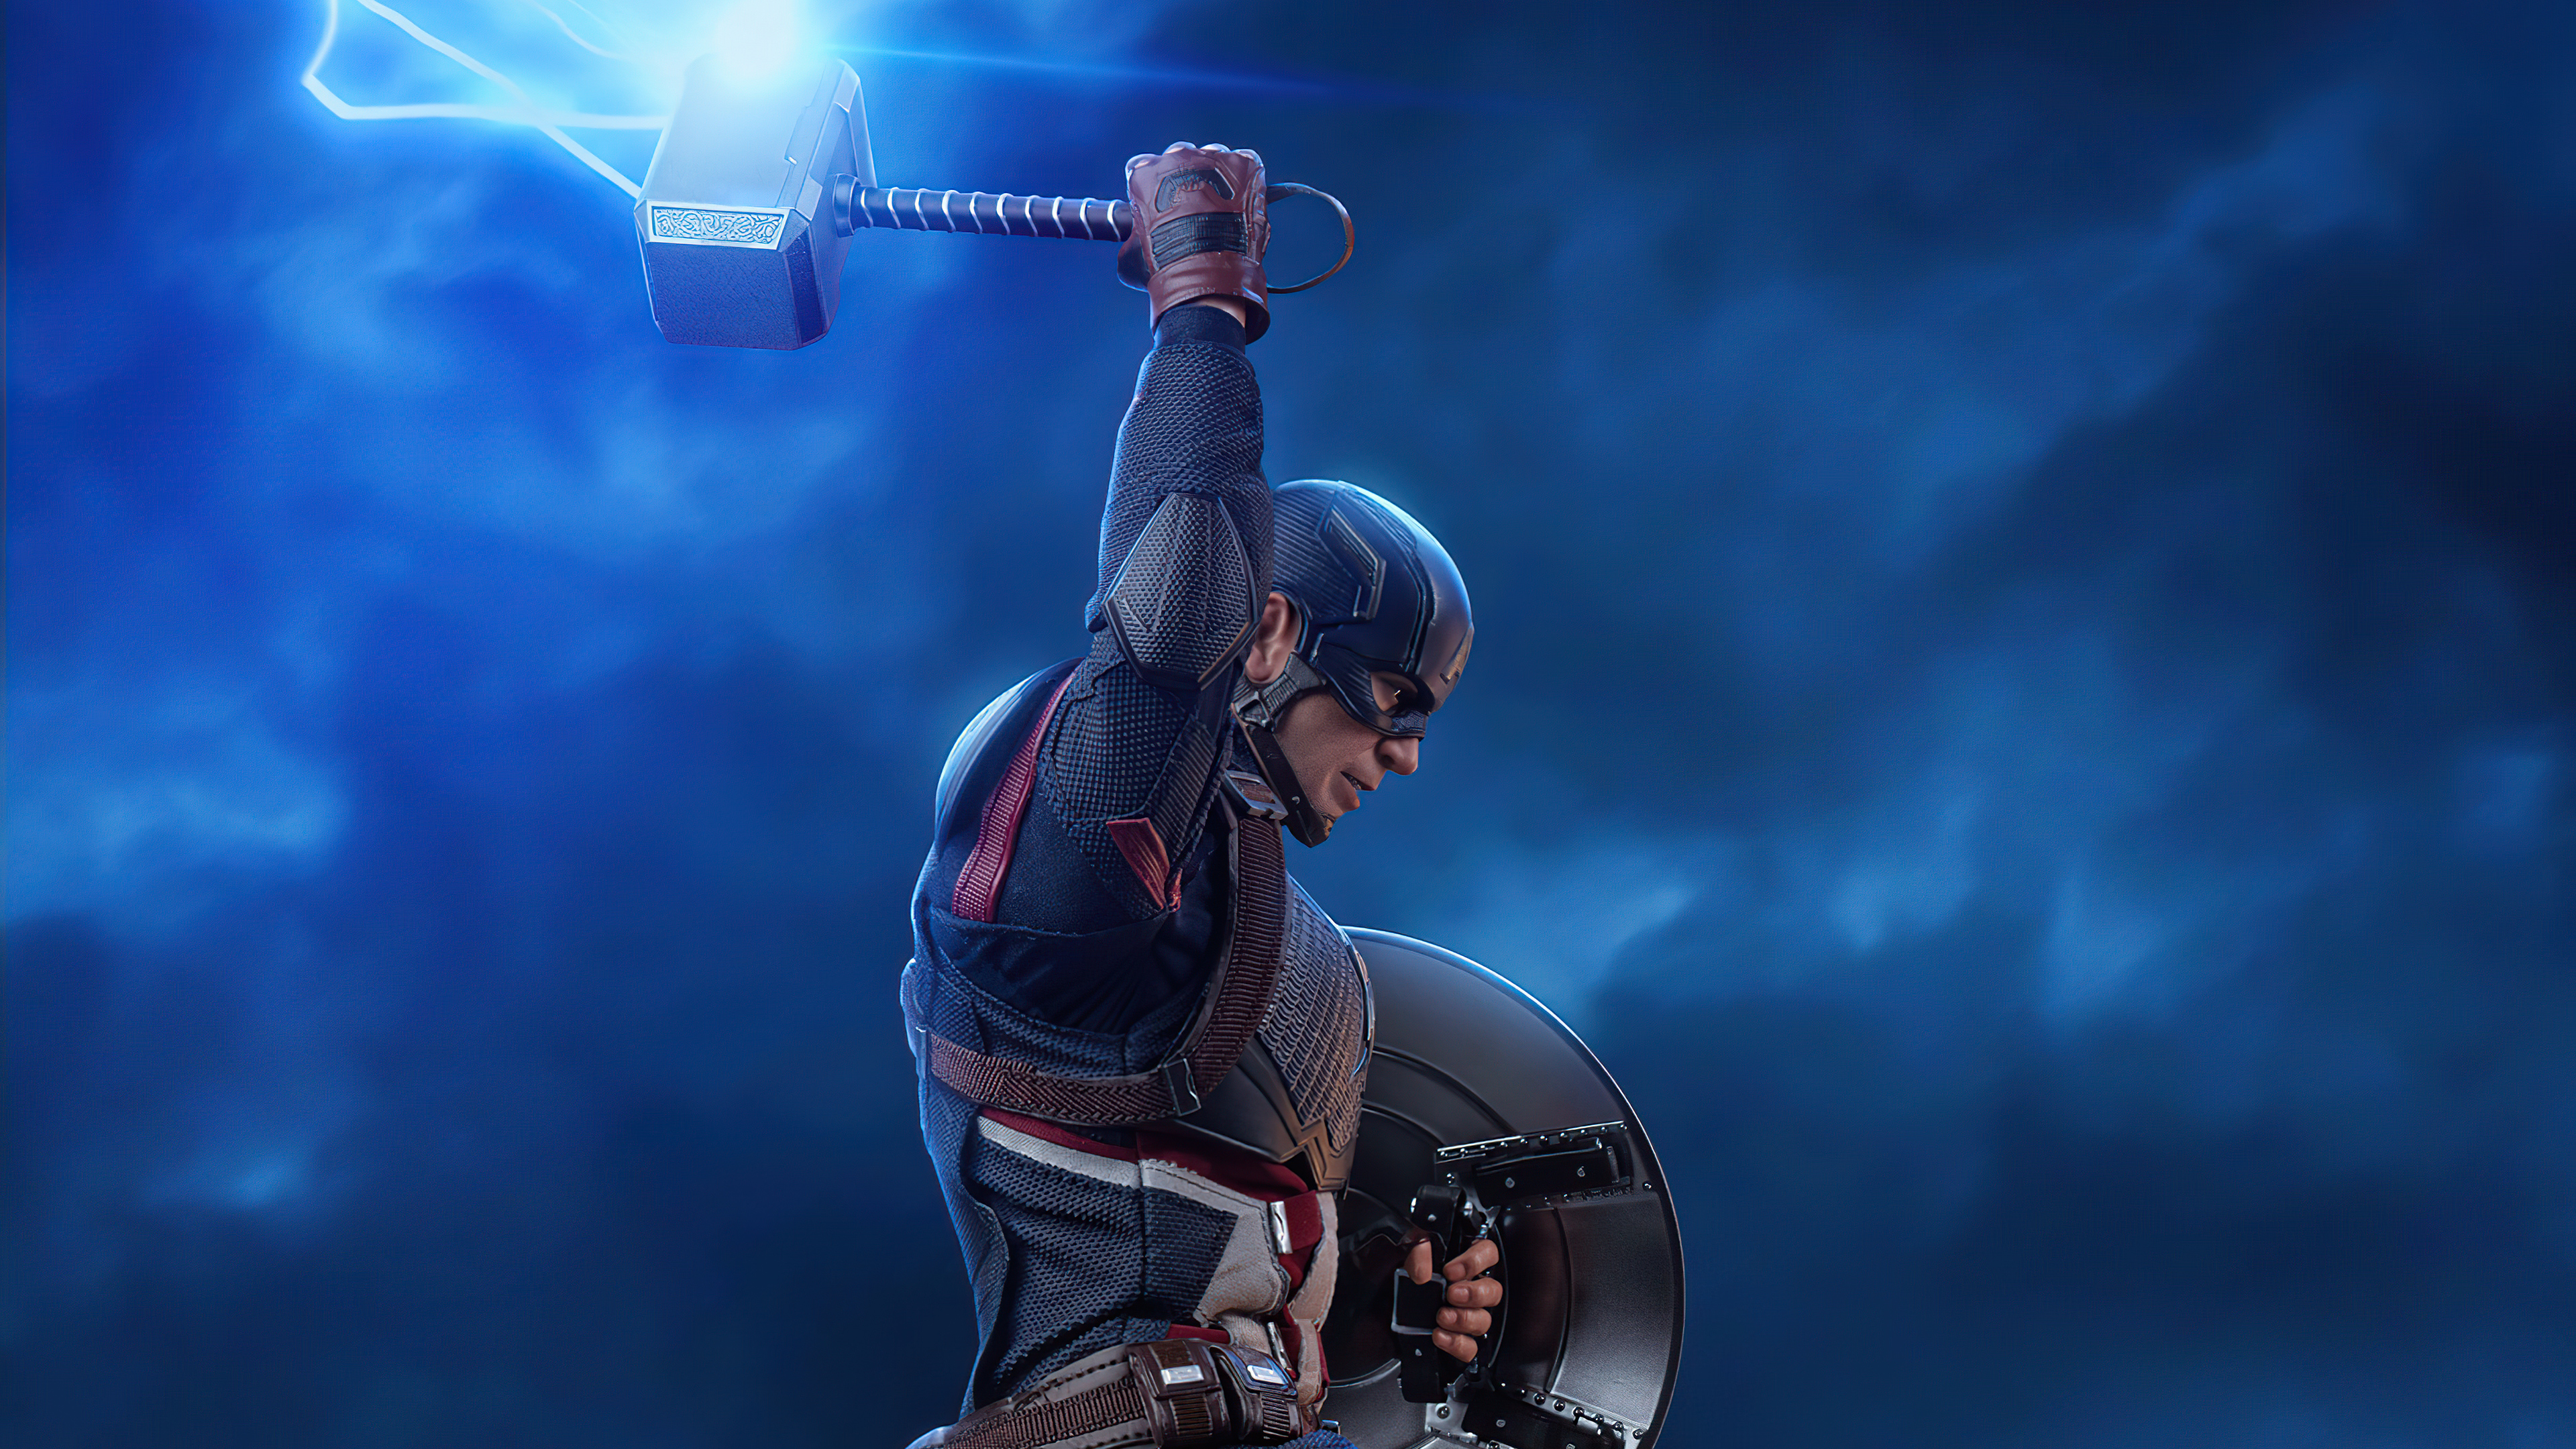 Captain America with Thor's Hammer Wallpaper 4k Ultra HD ID:7060